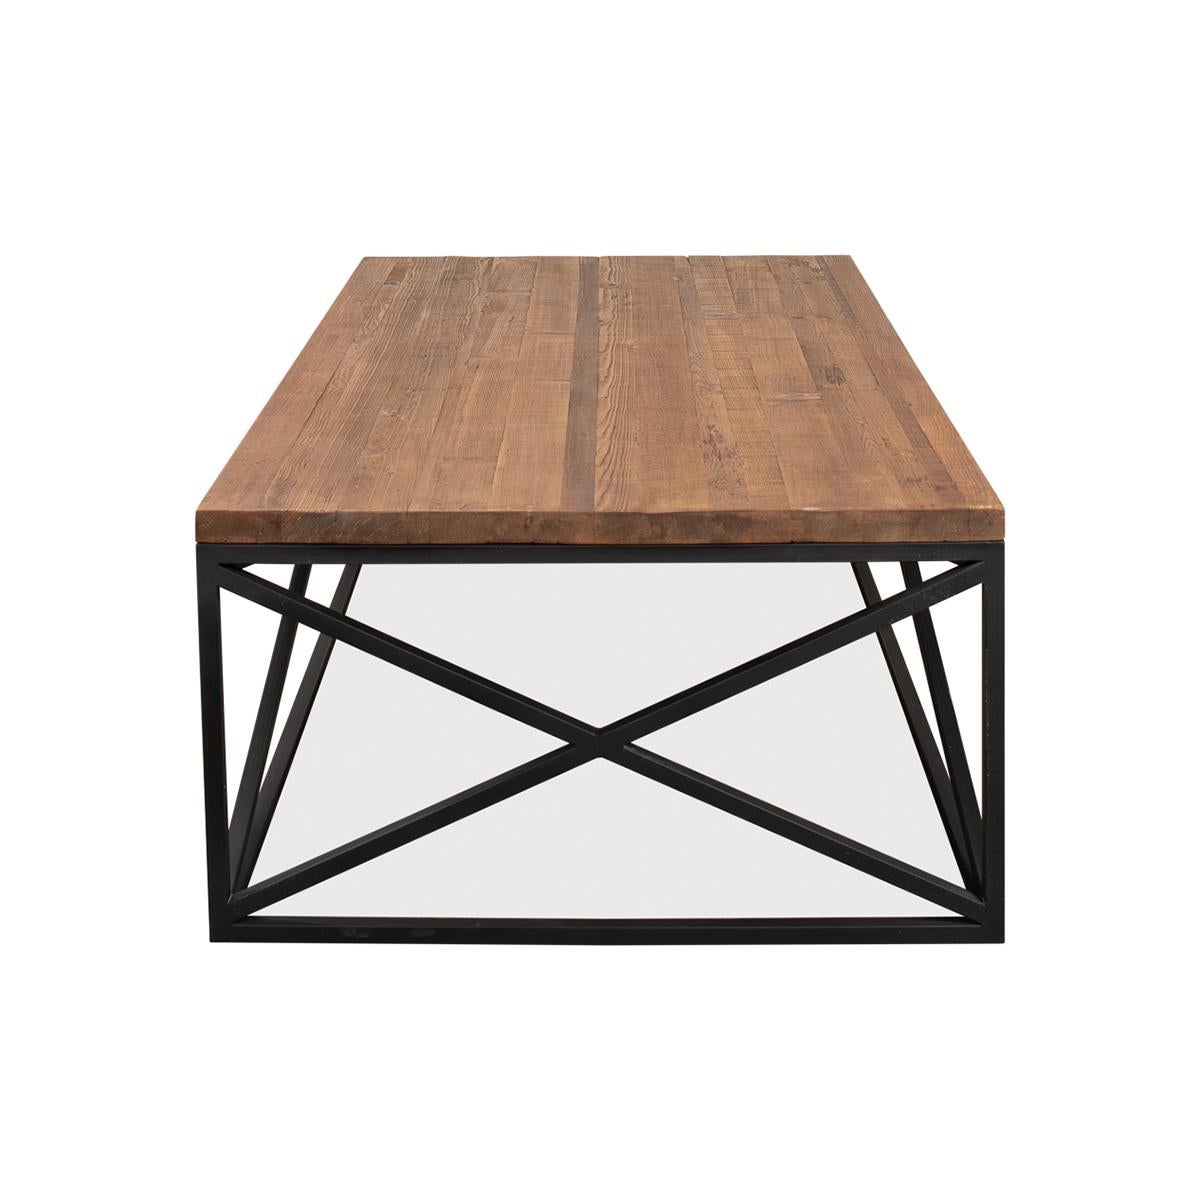 Asian Pine Top Industrial Coffee Table For Sale